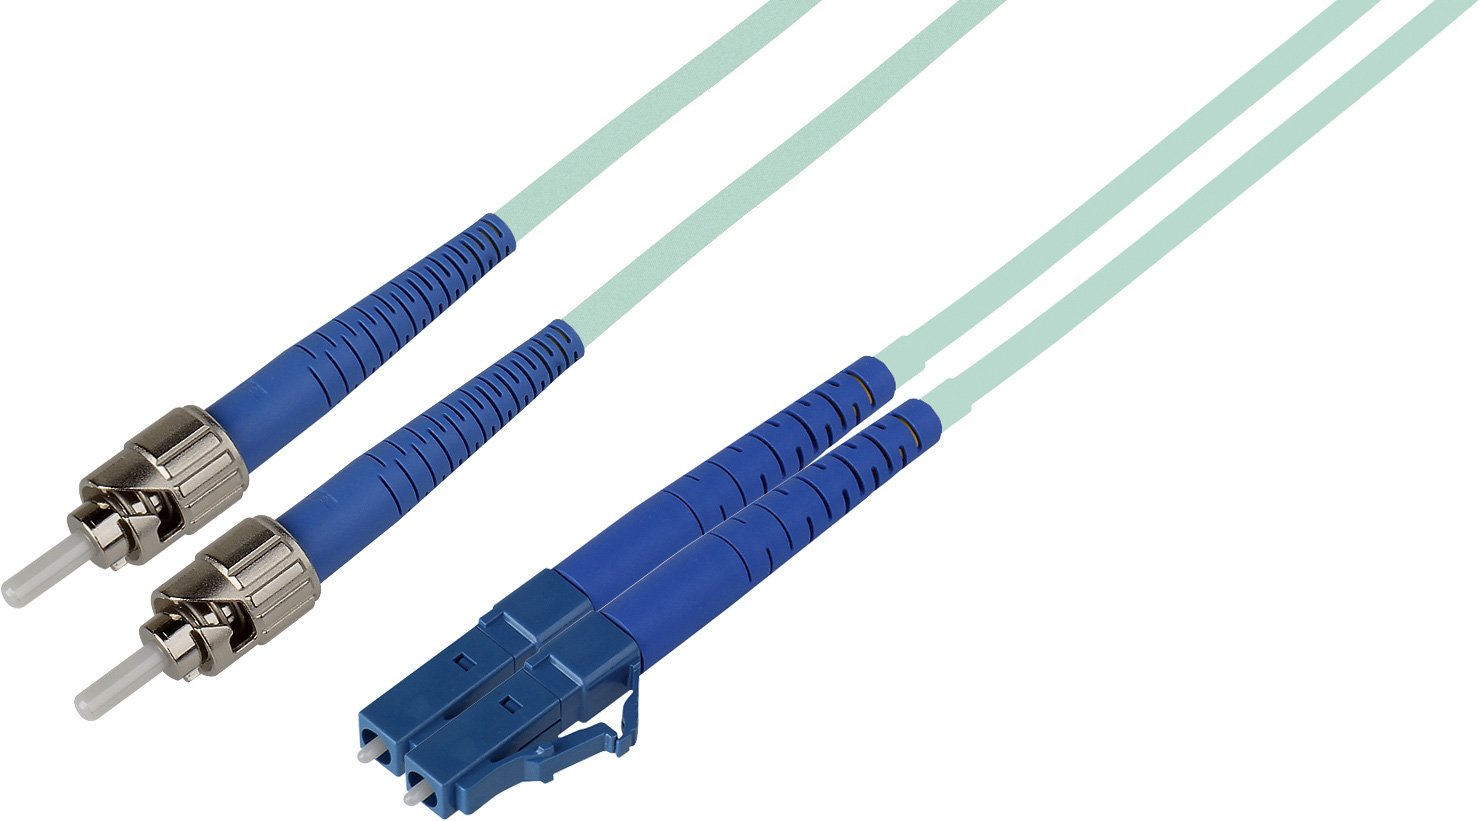 St To Lc Fiber Cable